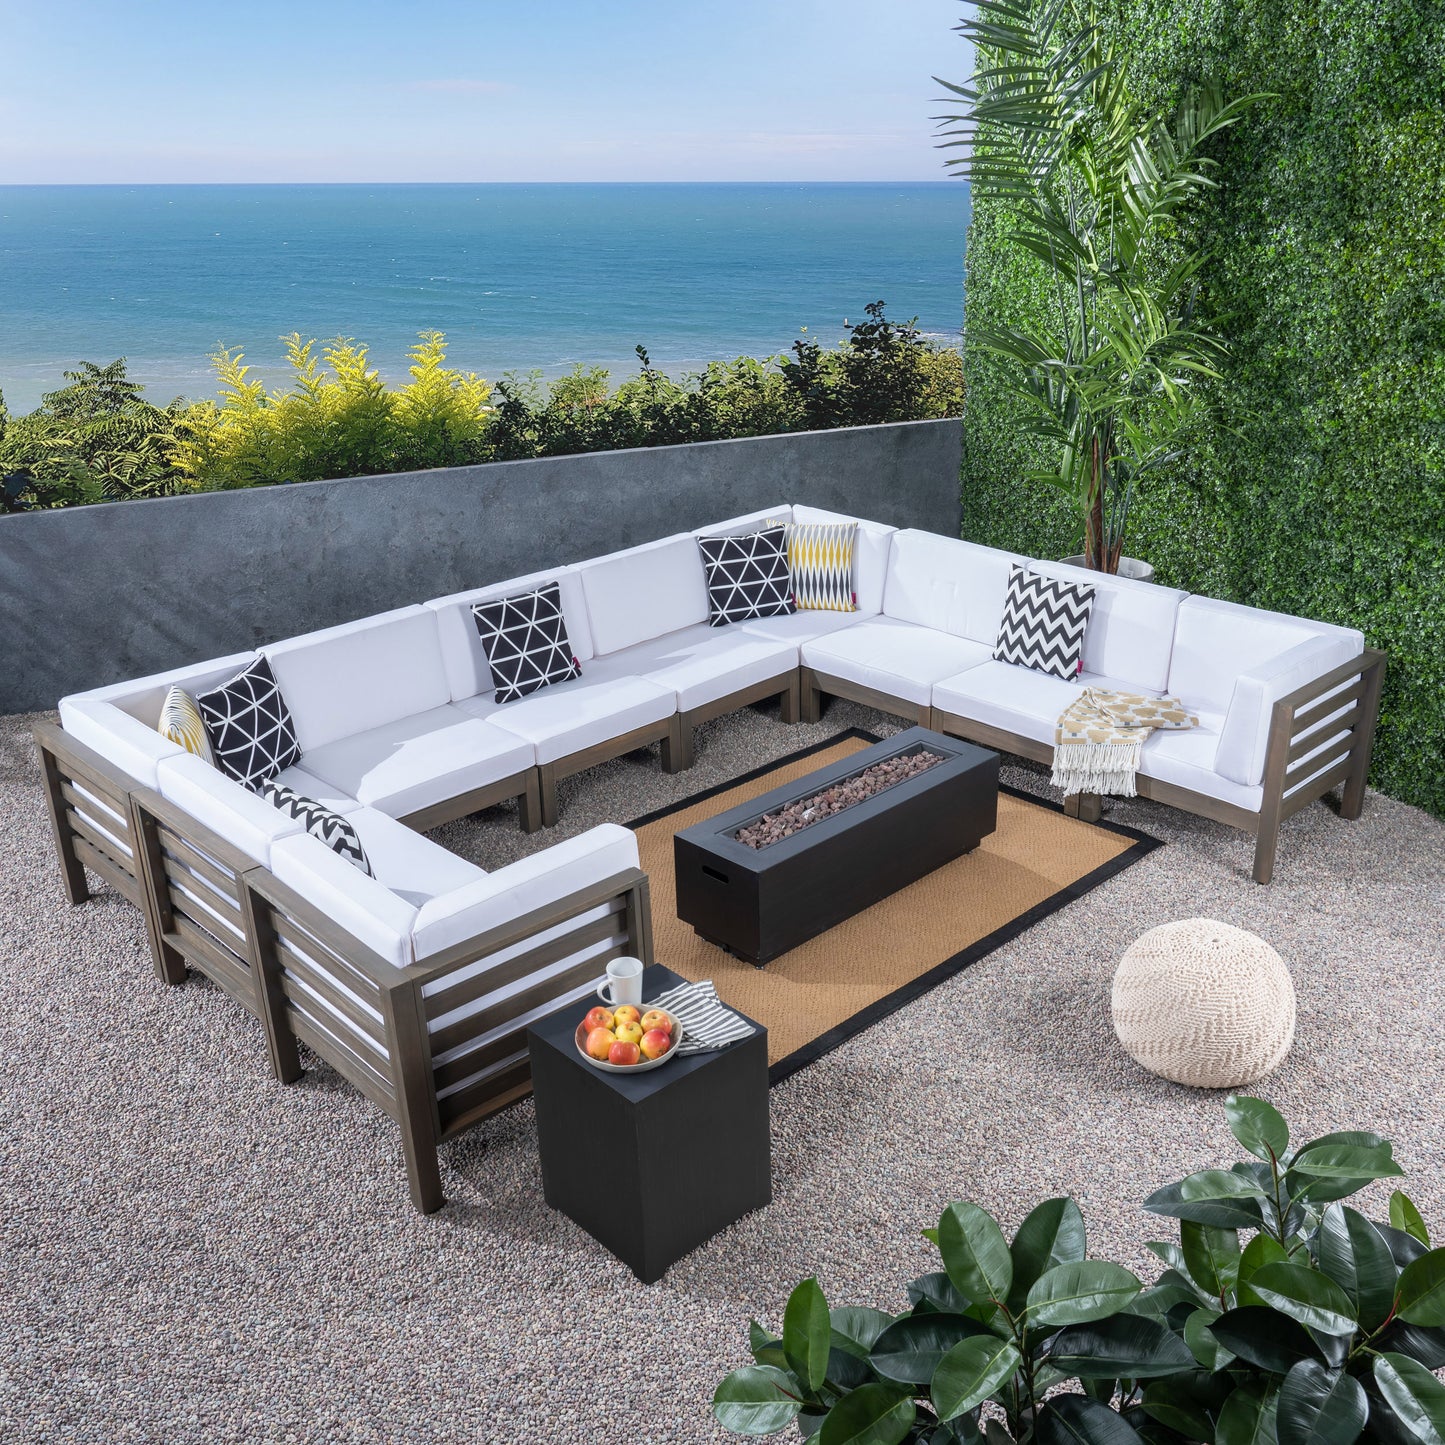 Krystin Outdoor 12 Piece U-Shaped Sectional Sofa Set with Fire Pit